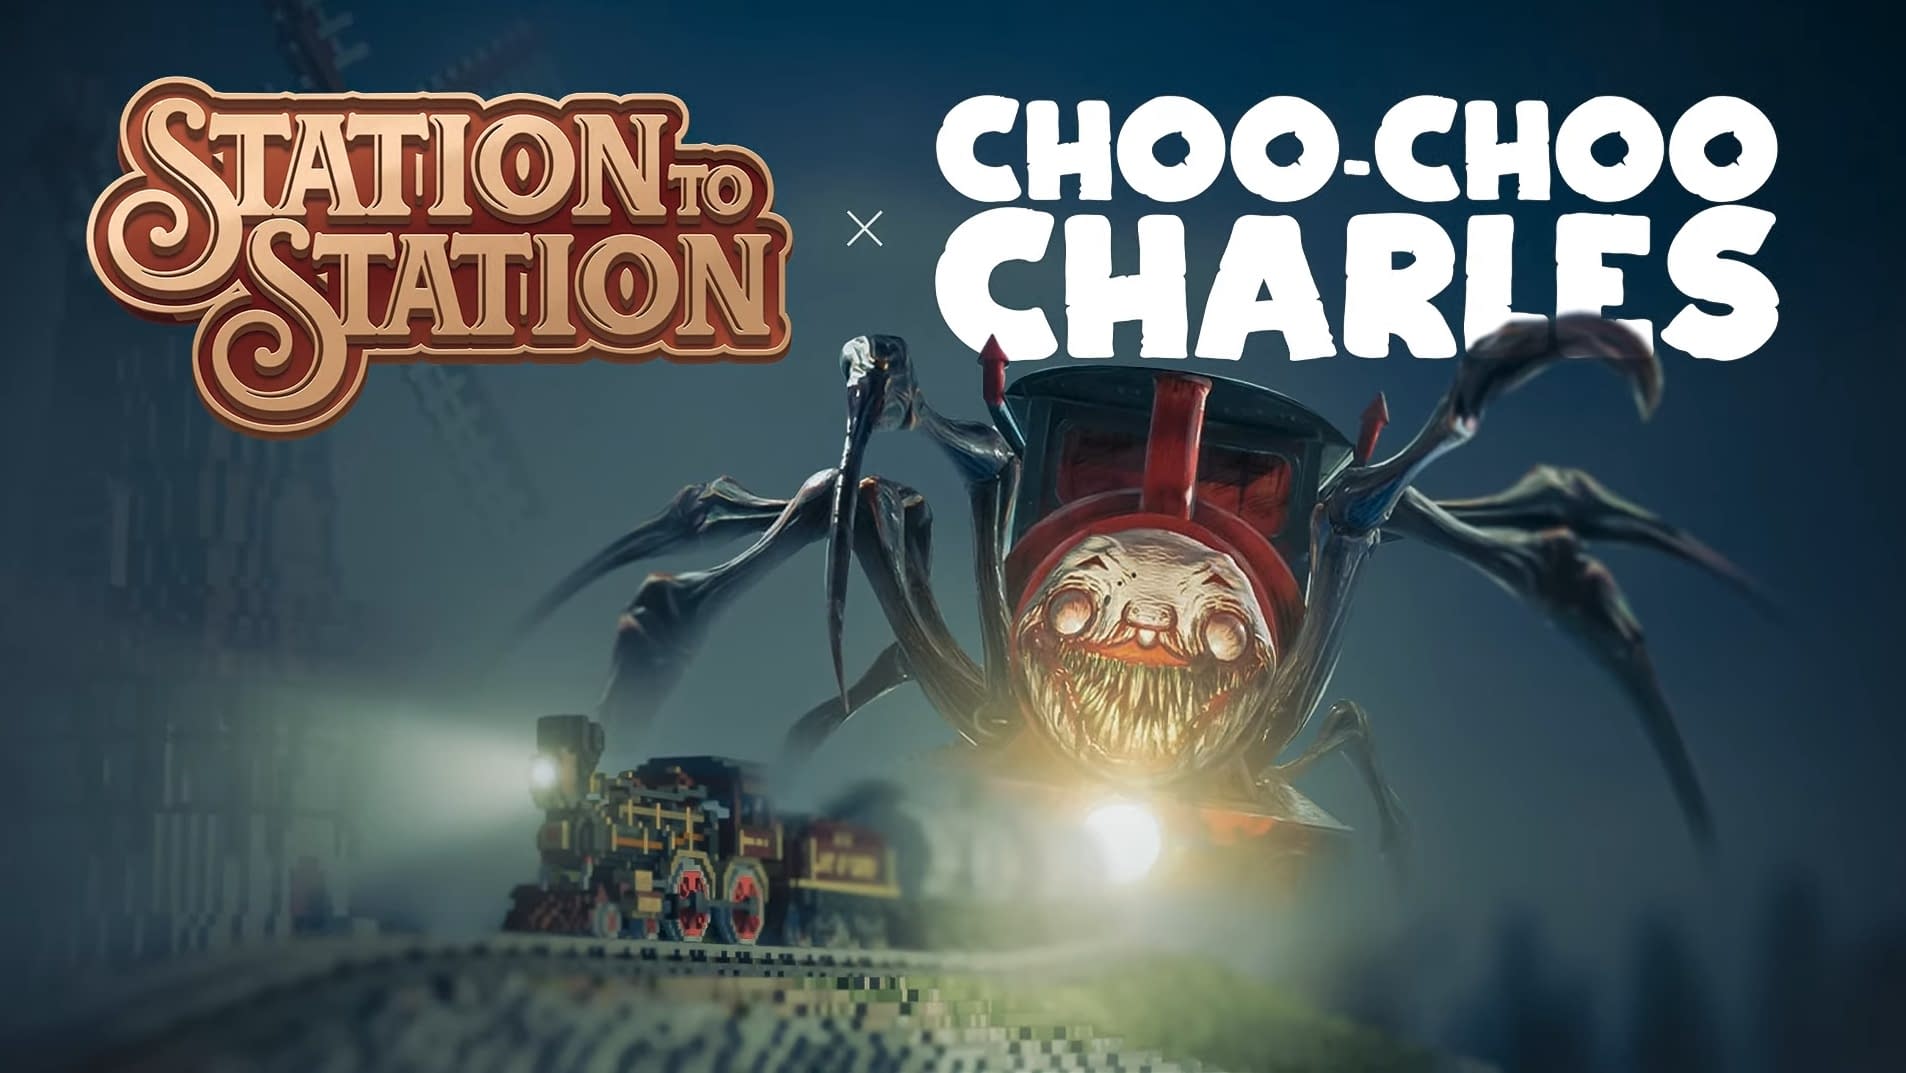 Station To Station Releases Halloween Update With Choo Choo Charles